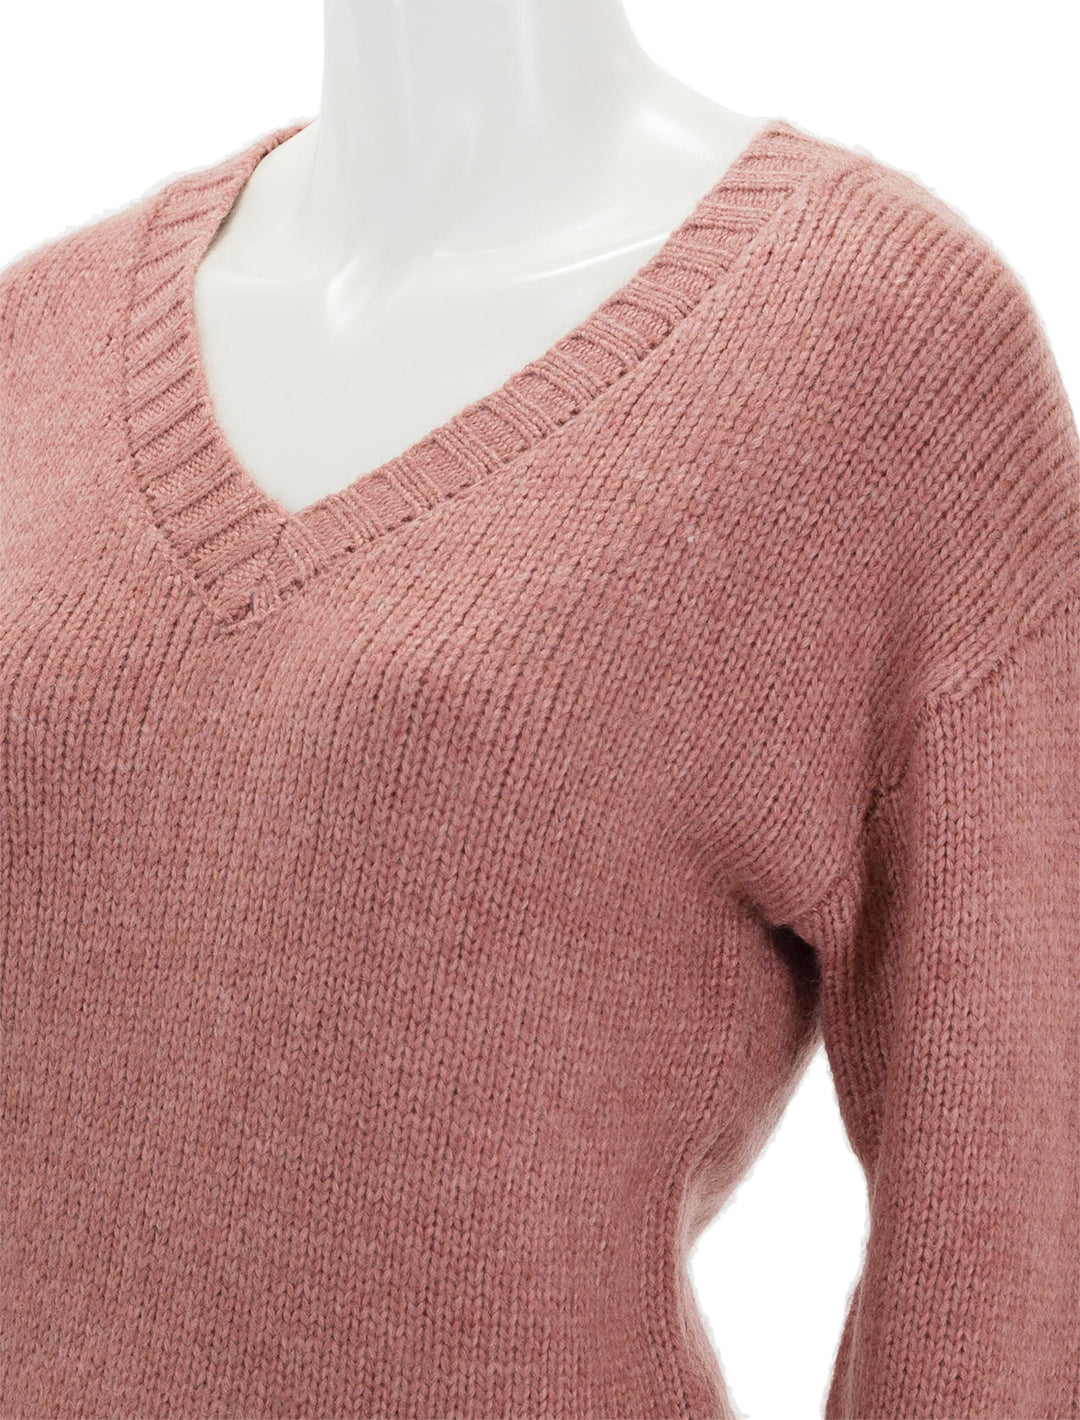 Close-up view of Steve Madden's houston sweater in rose.